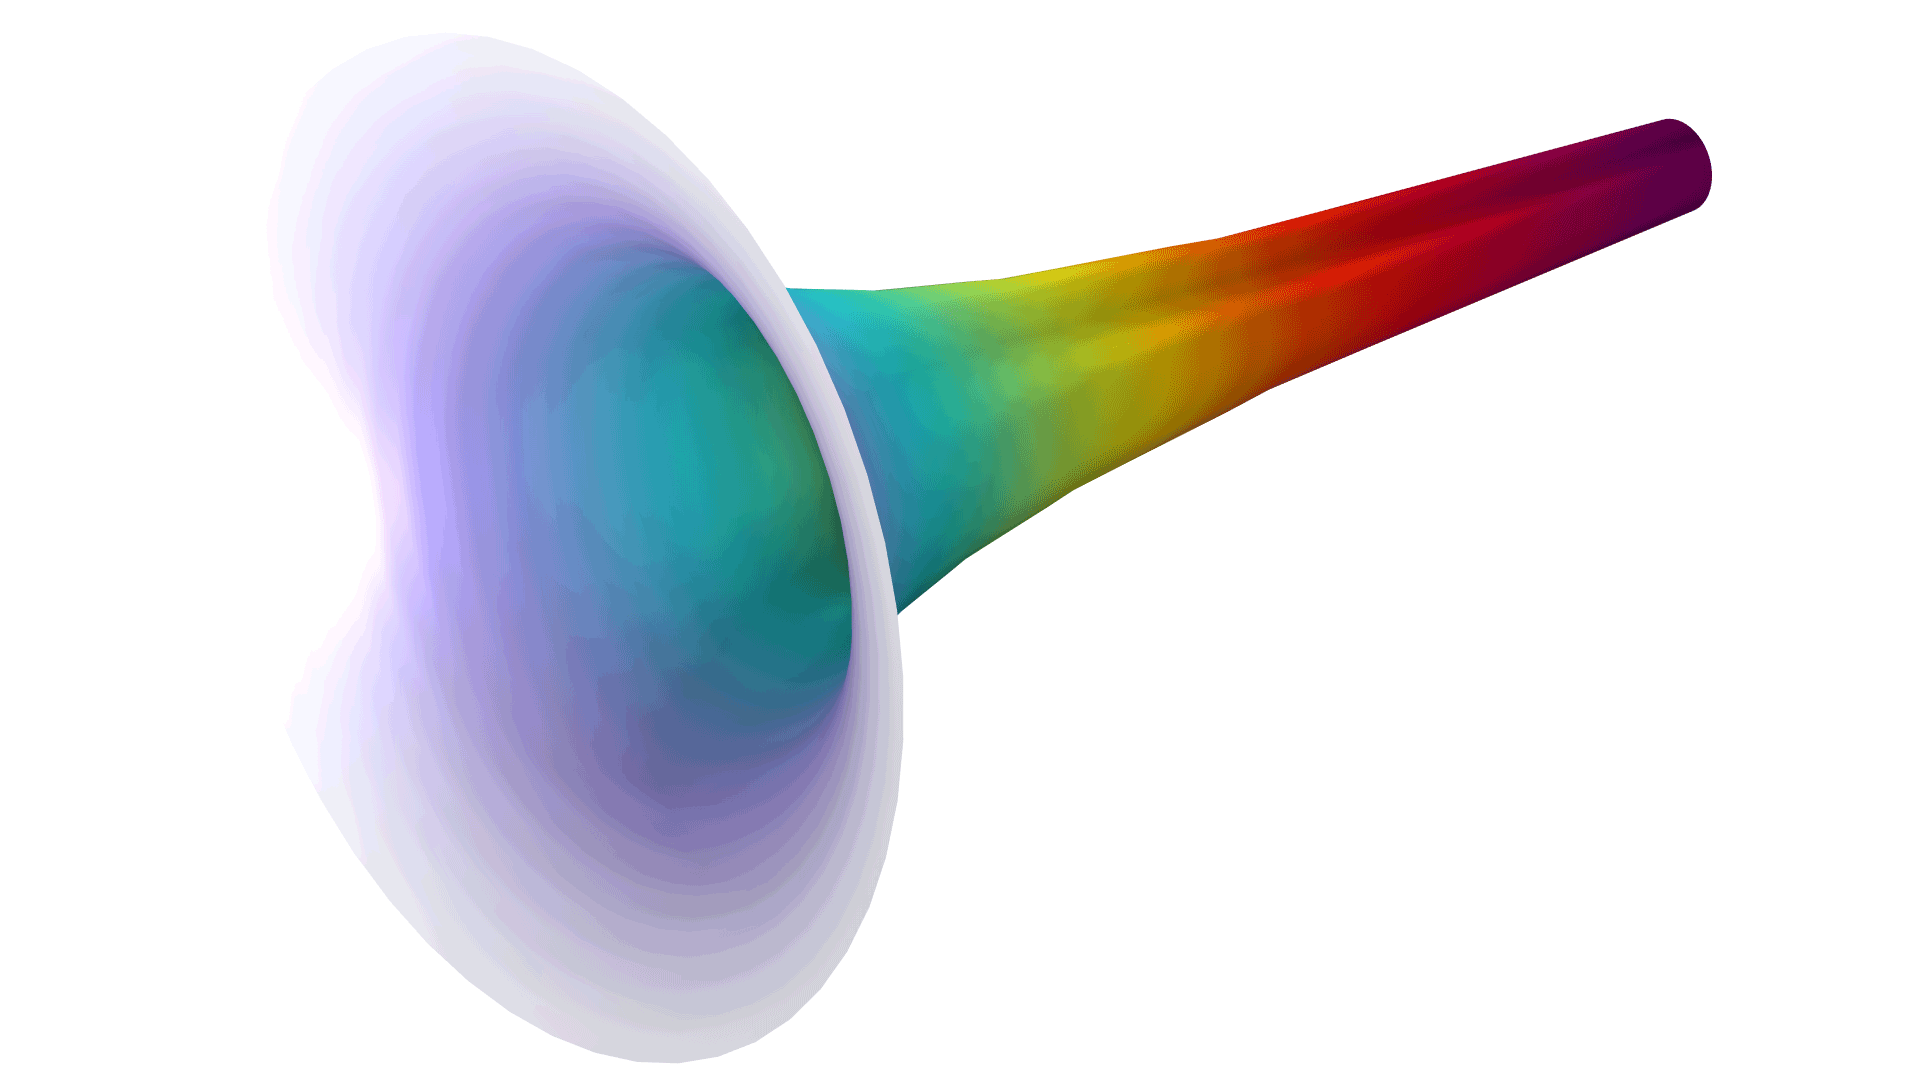 The electric field between two concentric cylinders in the Prism color table.